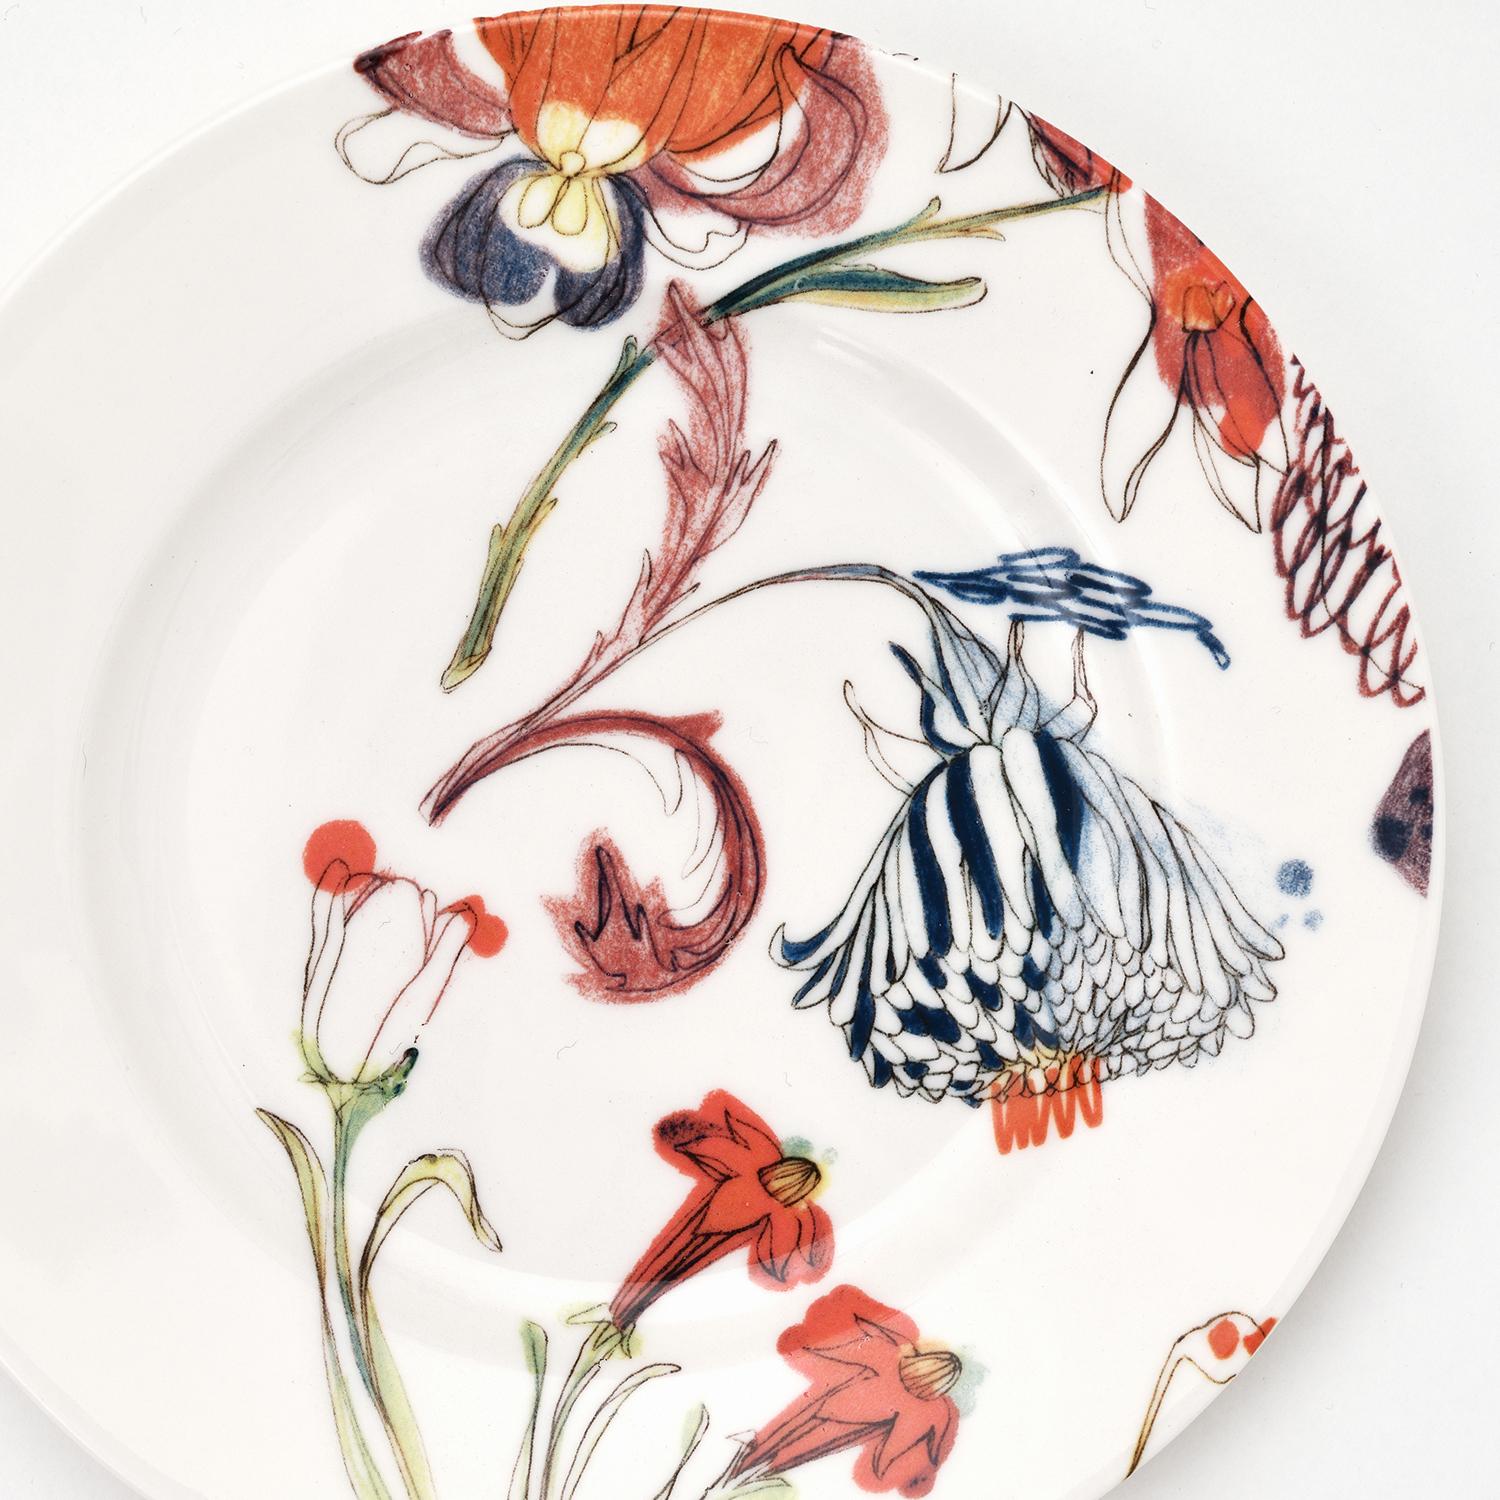 Belonging to the Grandma's Garden porcelain series, the design of this bread plate represents a sophisticated and elegant floral designs full of blossoms and buds with delicate colors blending together for a fresh and contemporary look, typical of